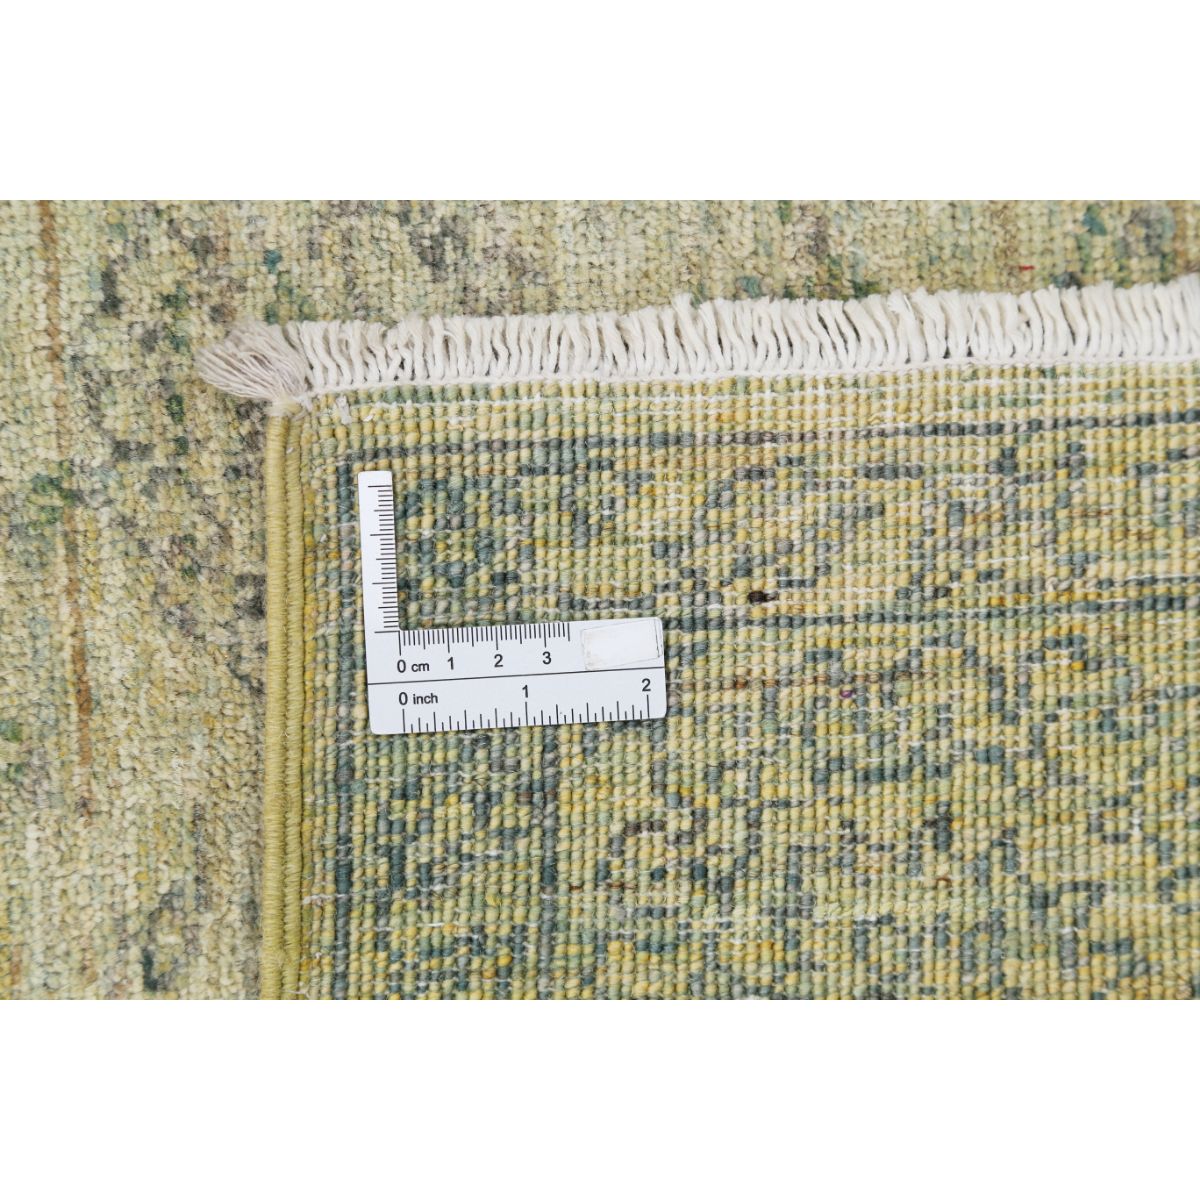 Serenity 5'8" X 7'6" Wool Hand-Knotted Rug